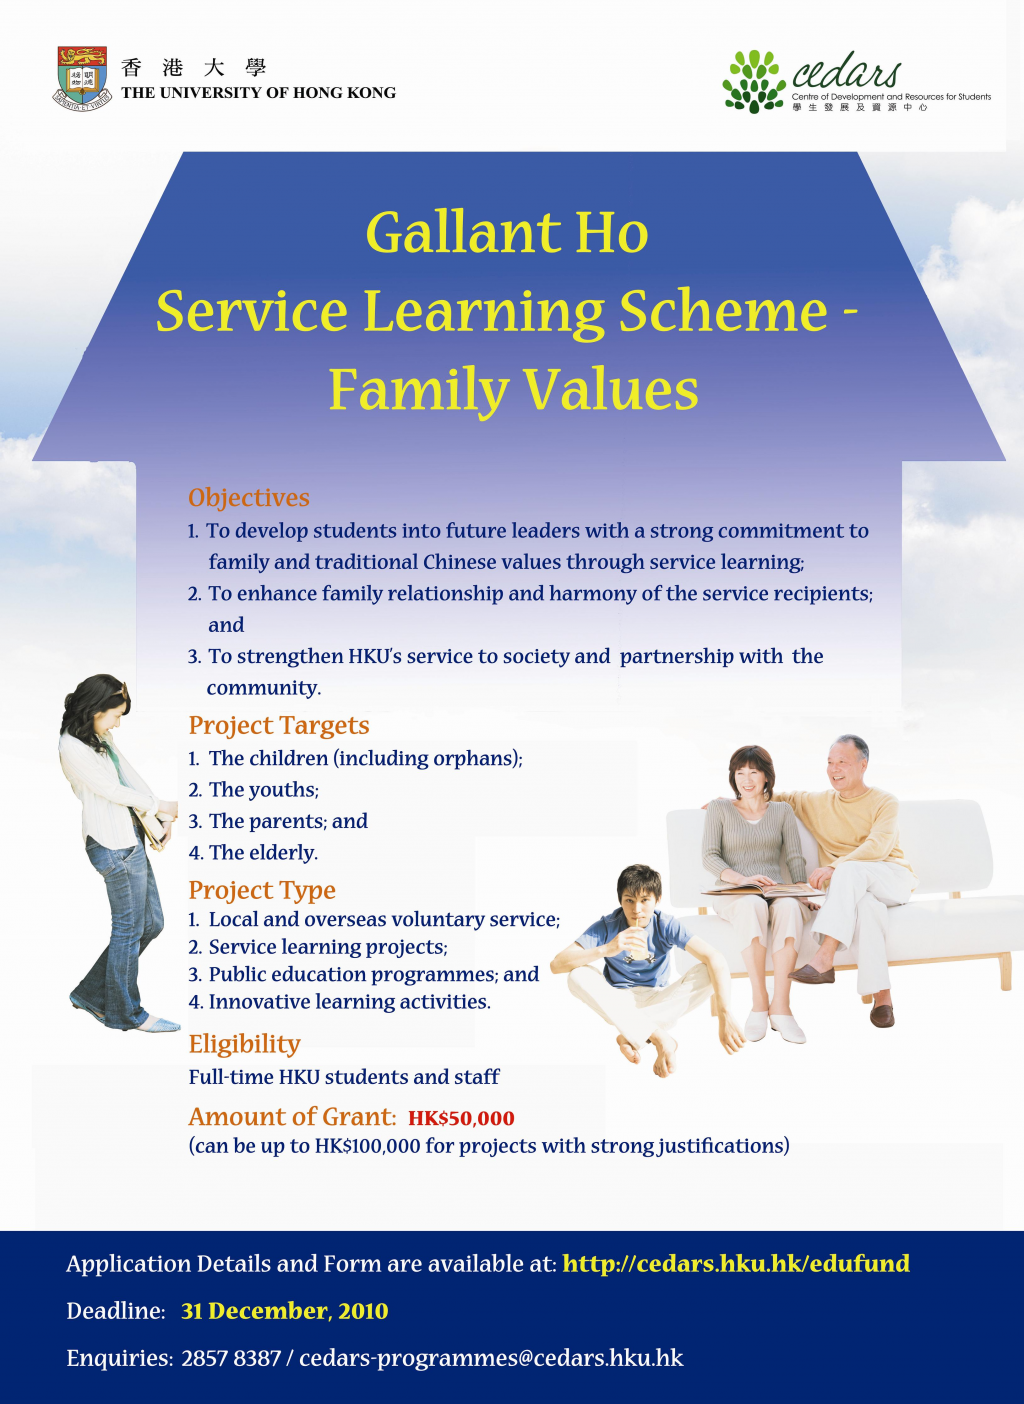 Gallant Ho Service Learning Scheme – Family Values Opens for Application